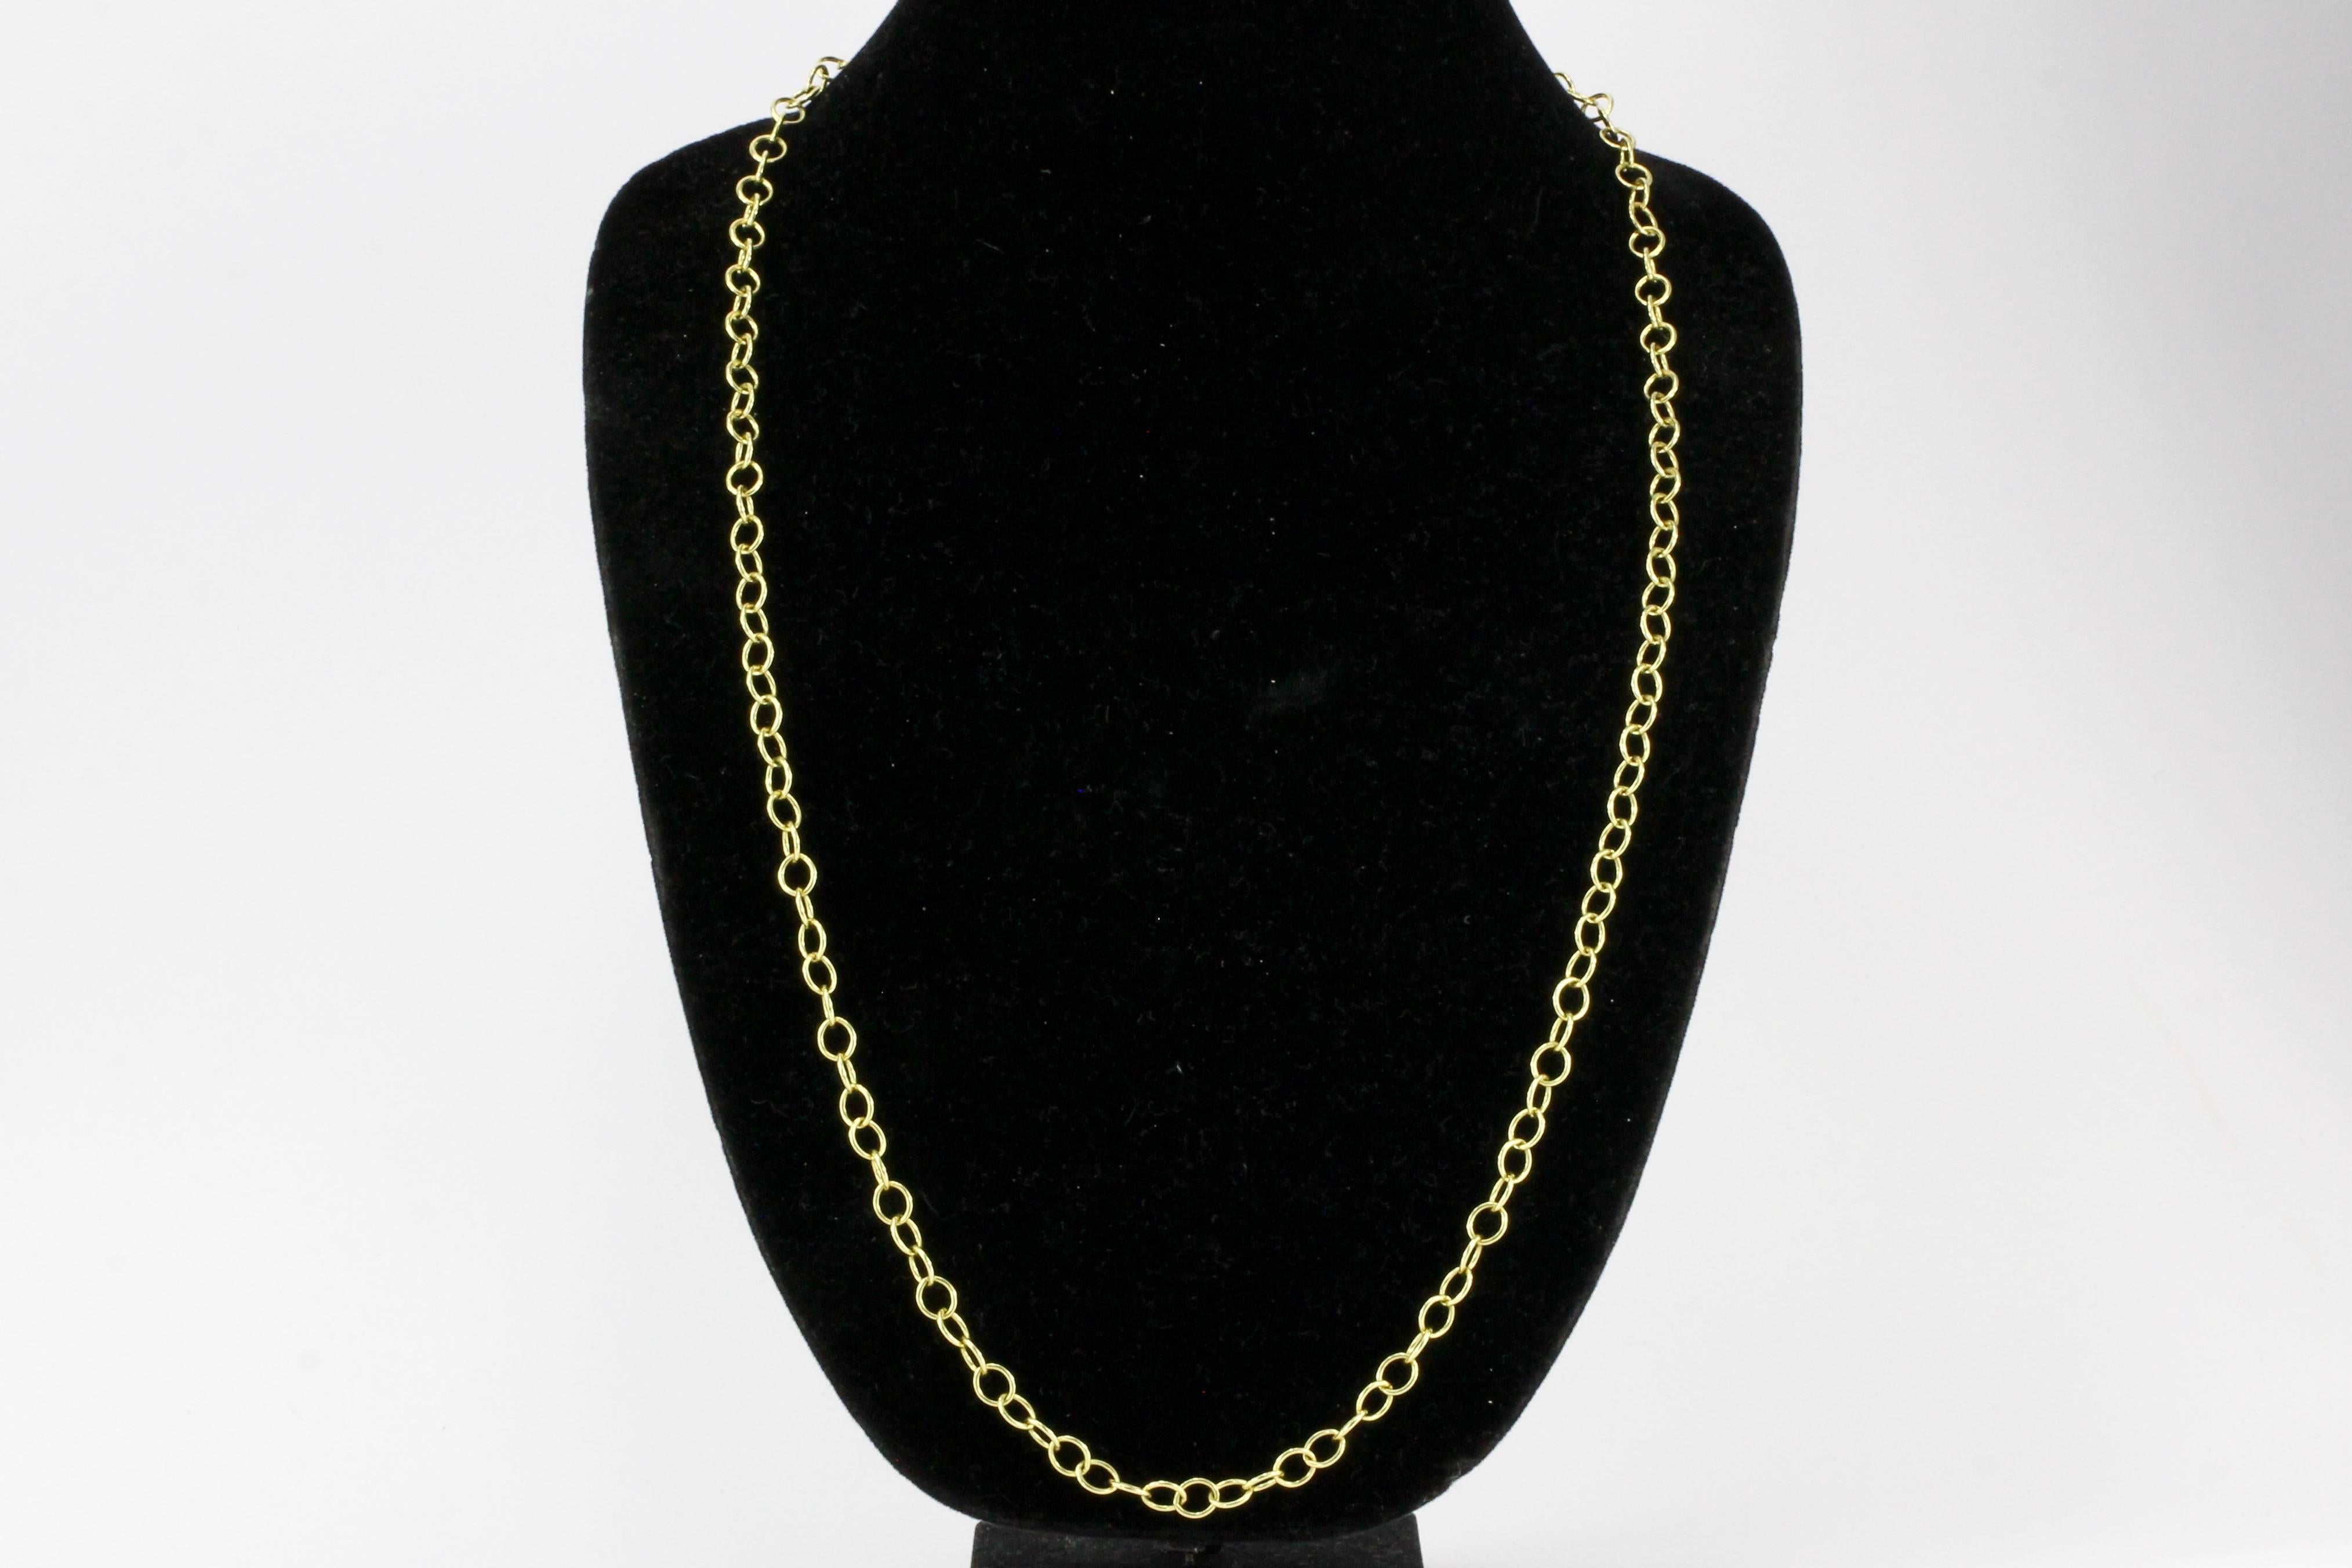 Era: Modern

Designer: Temple St. Clair 

Hallmark: 750 (on clasp and base of TSC tag)

Makers Mark: TSC tag & stamp of logo on base of tag

Composition: 18K Yellow Gold

Necklace Link Length: 7.75mm

Necklace Length: 32"

Necklace Weight: